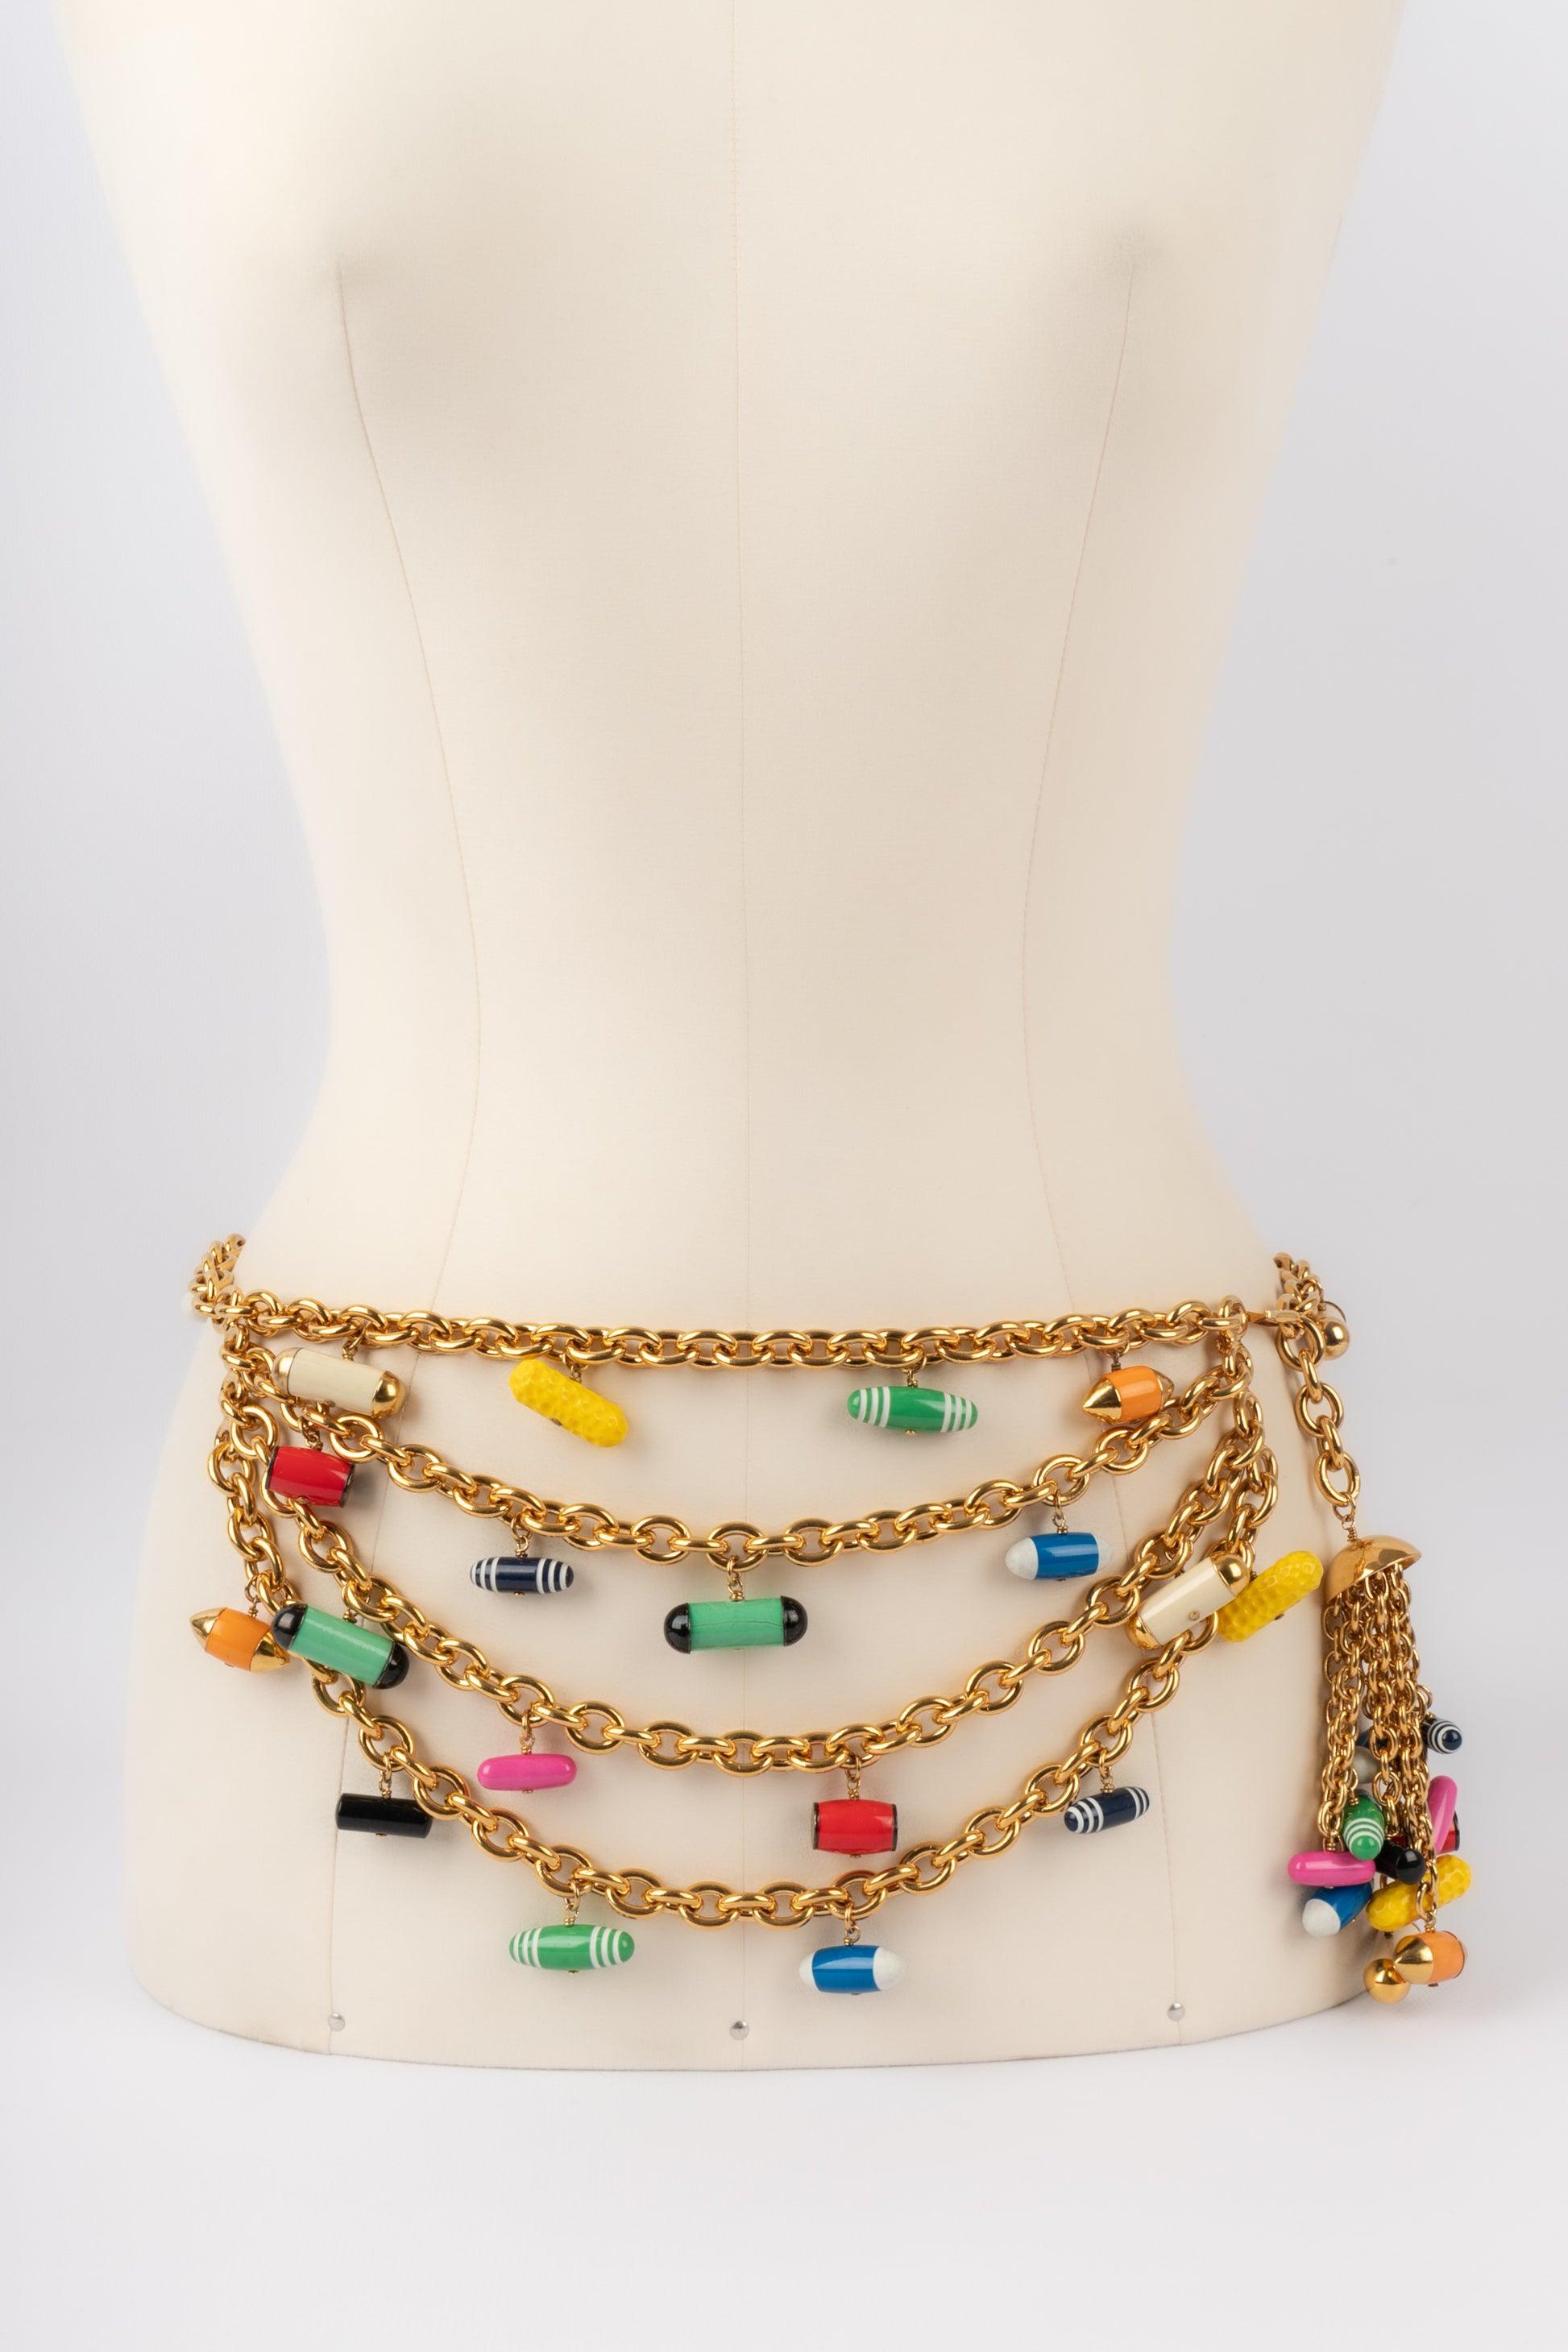 Chanel- (Made in France) Golden metal belt ornamented with multicolored resin charms. 1992 Spring-Summer Collection. To be mentioned, a few golden metal lacks on two charms.

Additional information:
Condition: Very good condition
Dimensions: Length: